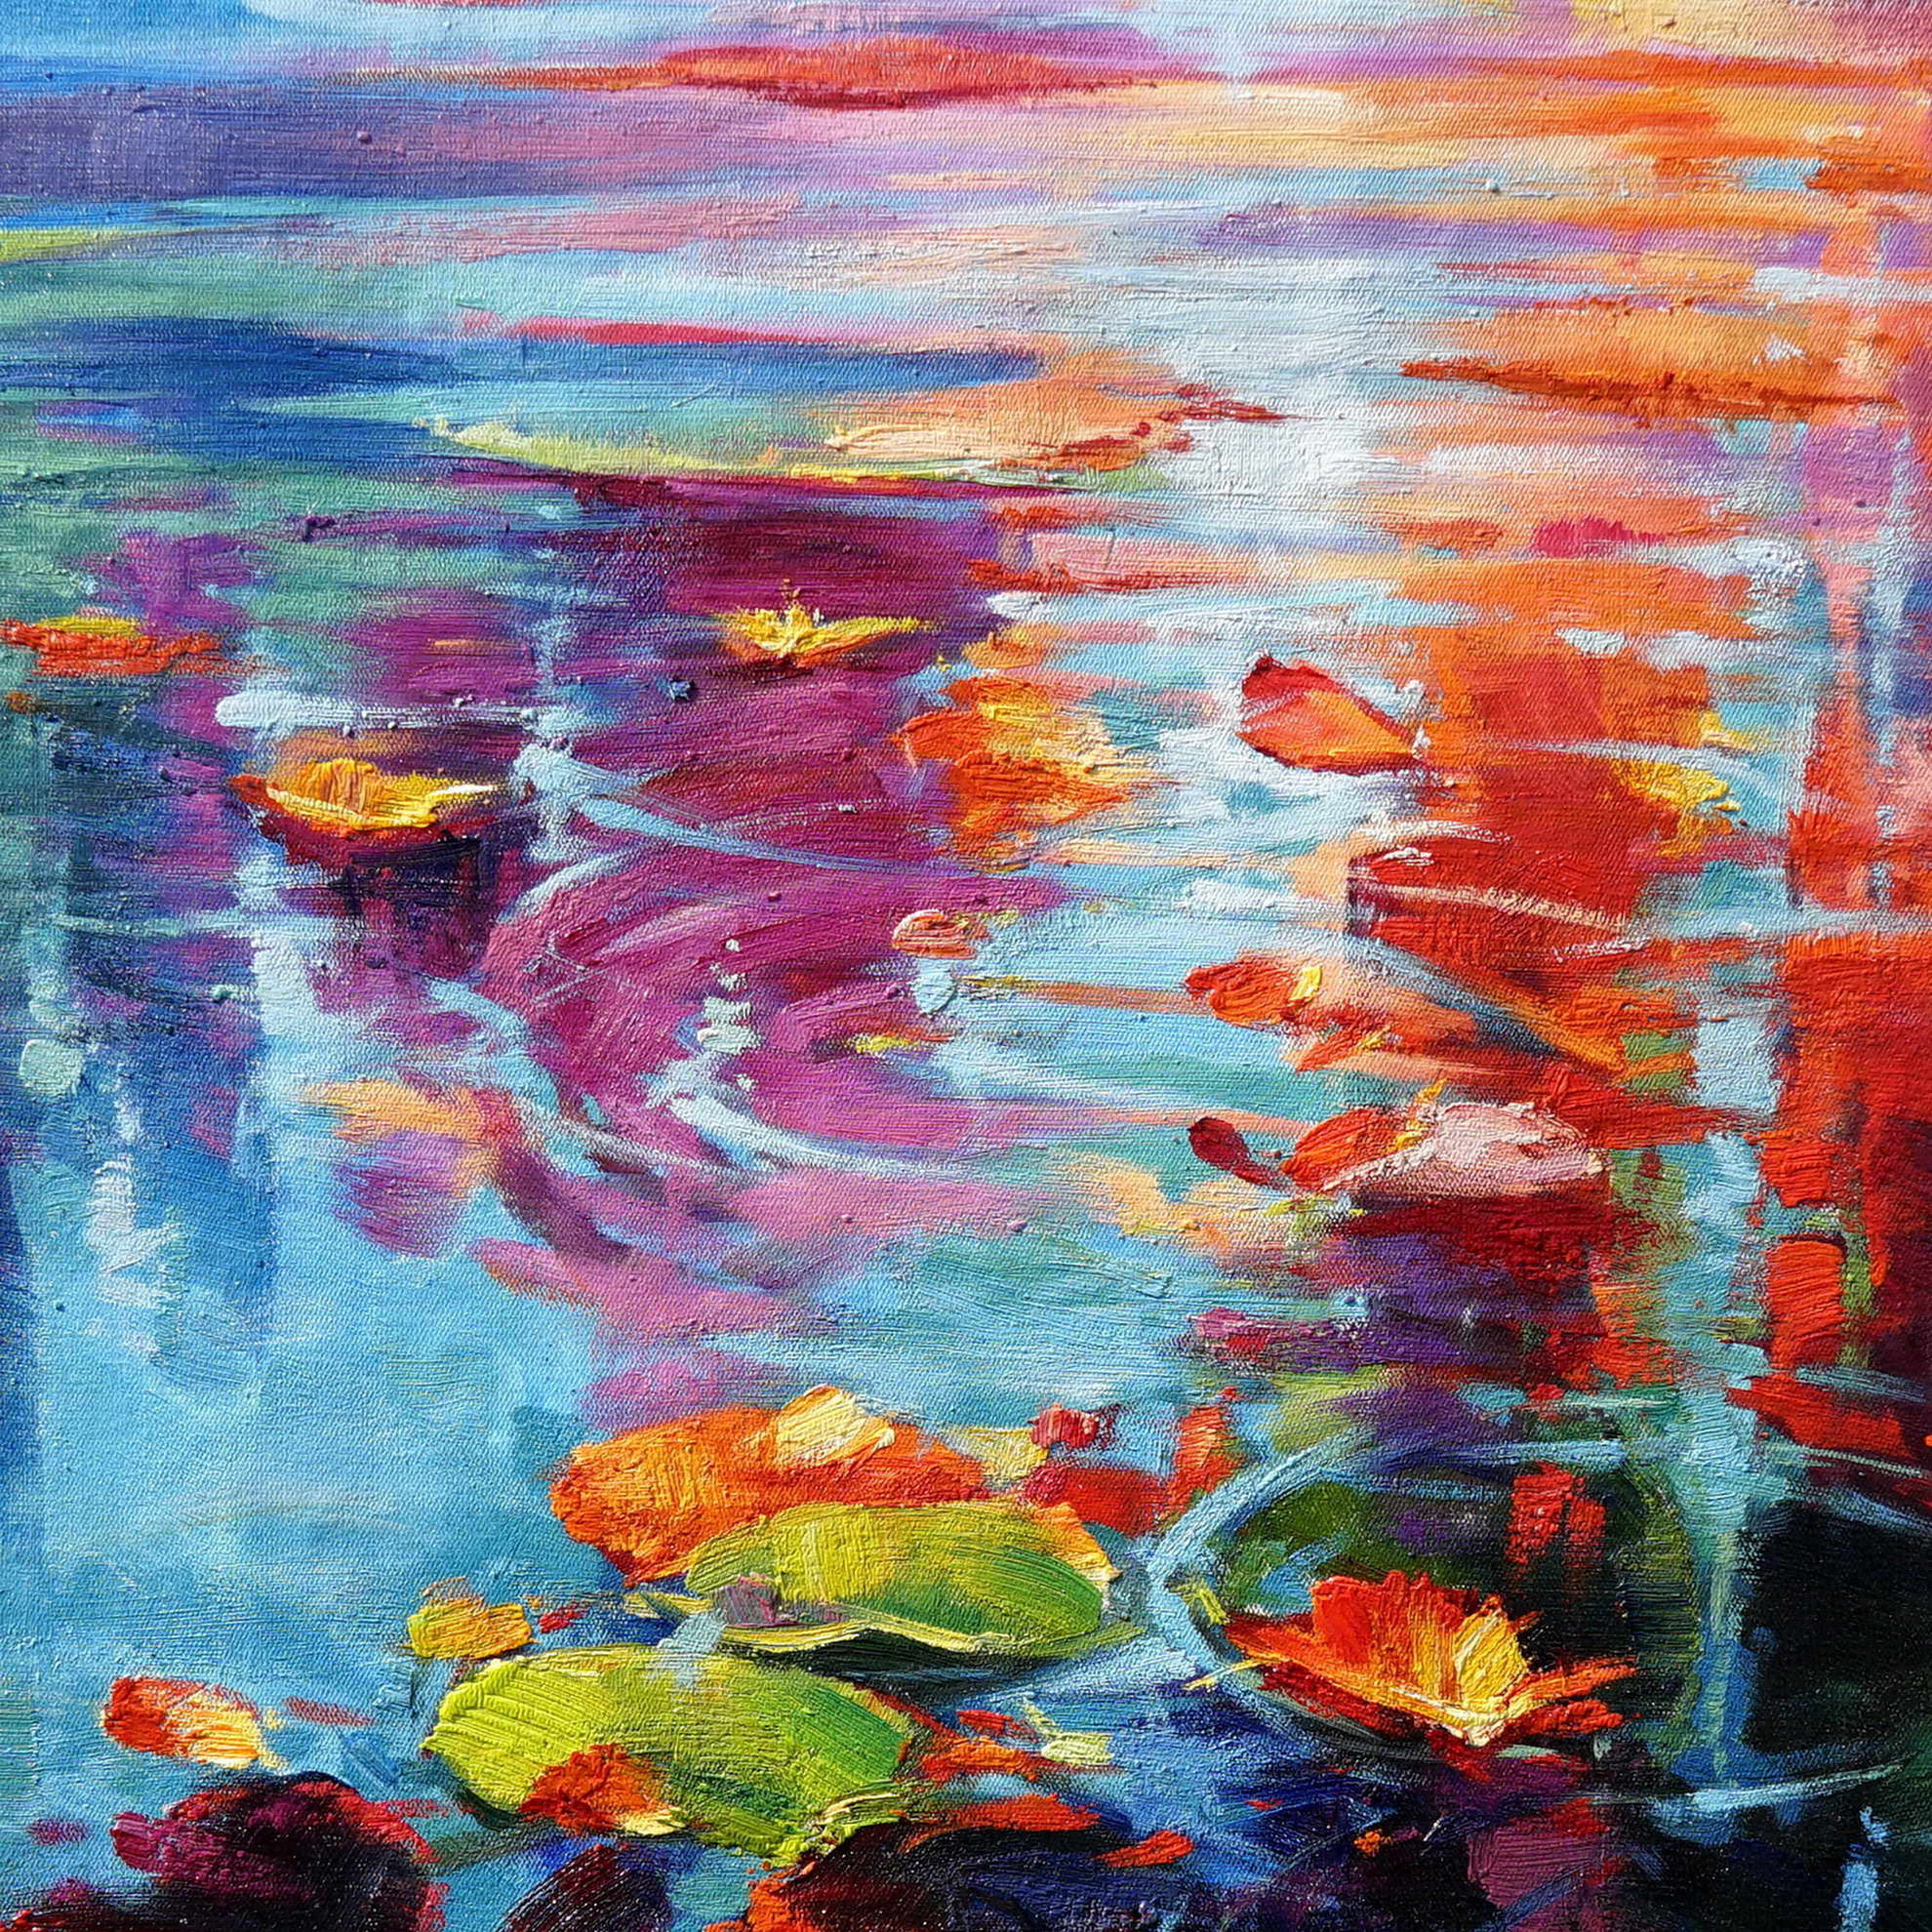 Hand painted Aquatic Reflections Lake of Water Lilies 60x80cm